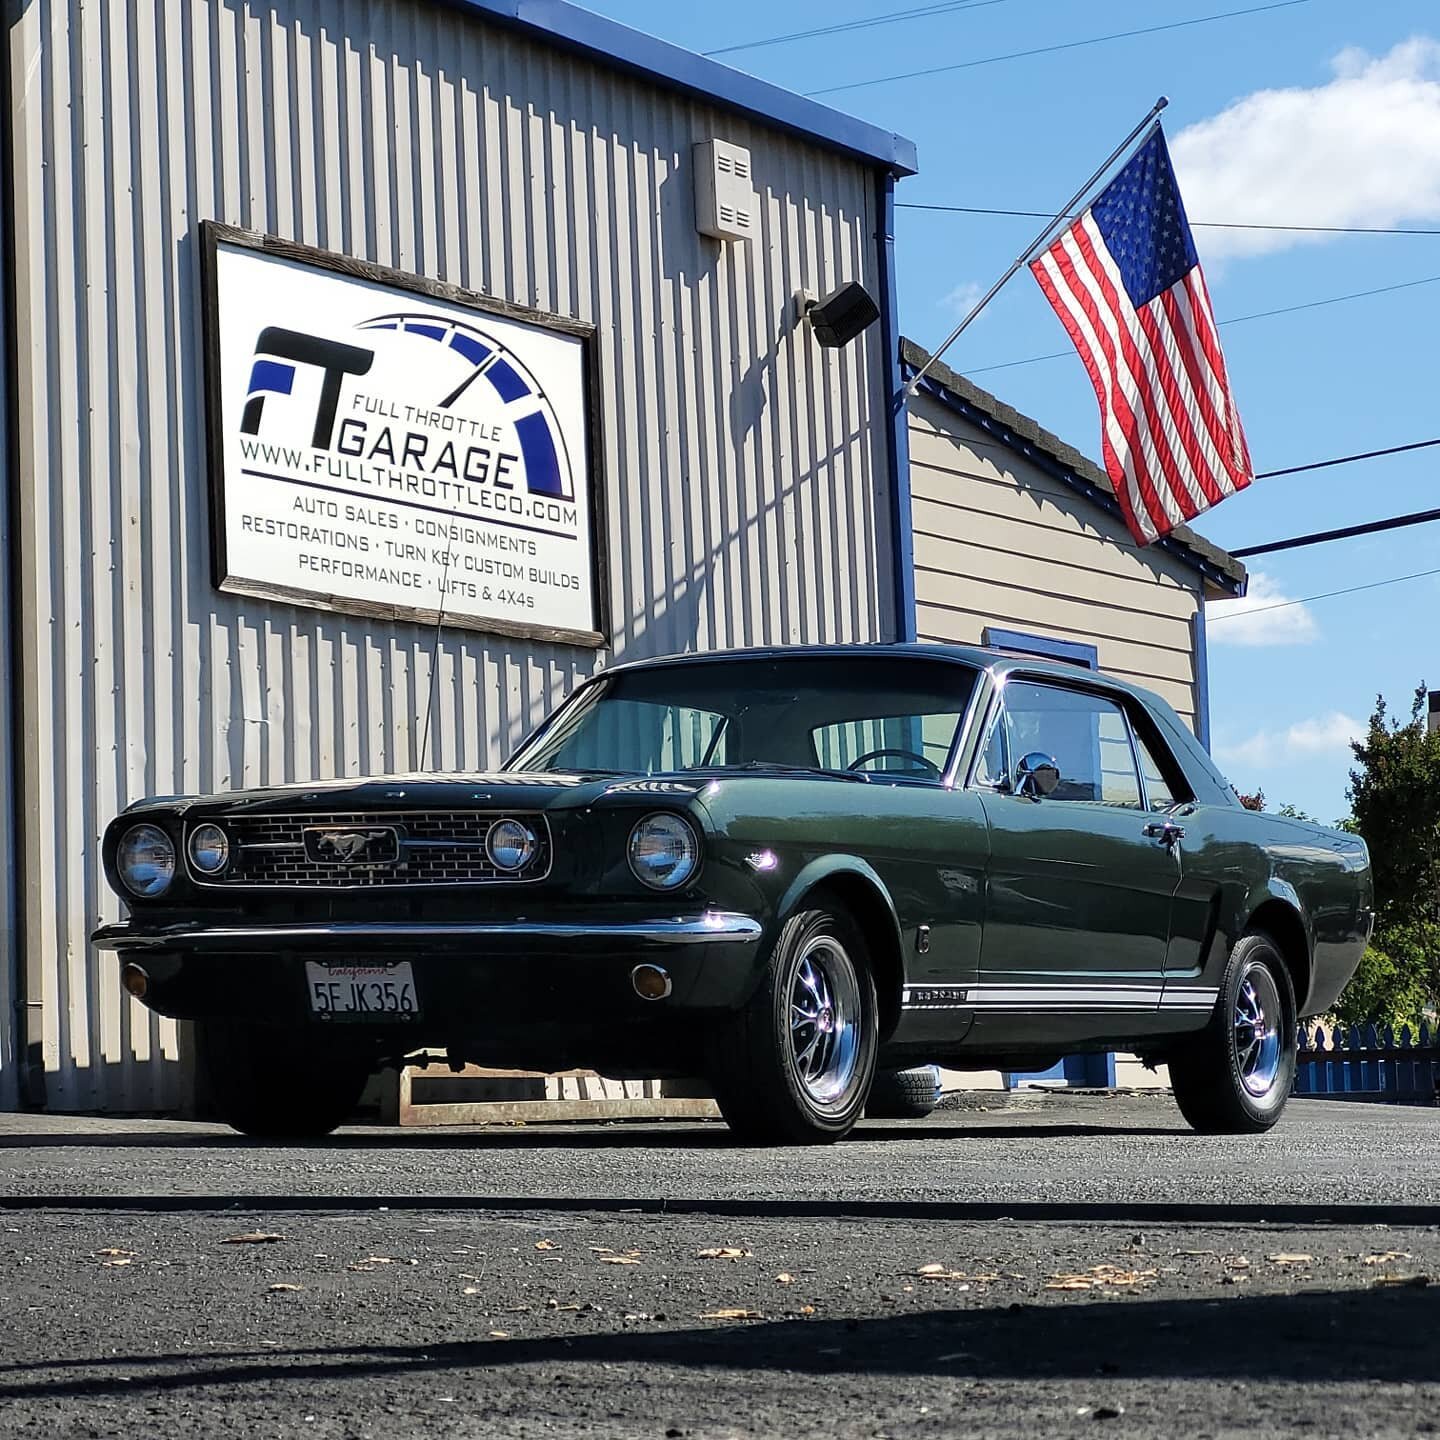 Check out this gorgeous #1965 #Ford #mustang #gt with a full Pony interior that came in to replace a broken windshield wiper motor. Even though we are in sunny California we appreciate when our customers want their cars in perfect working condition a